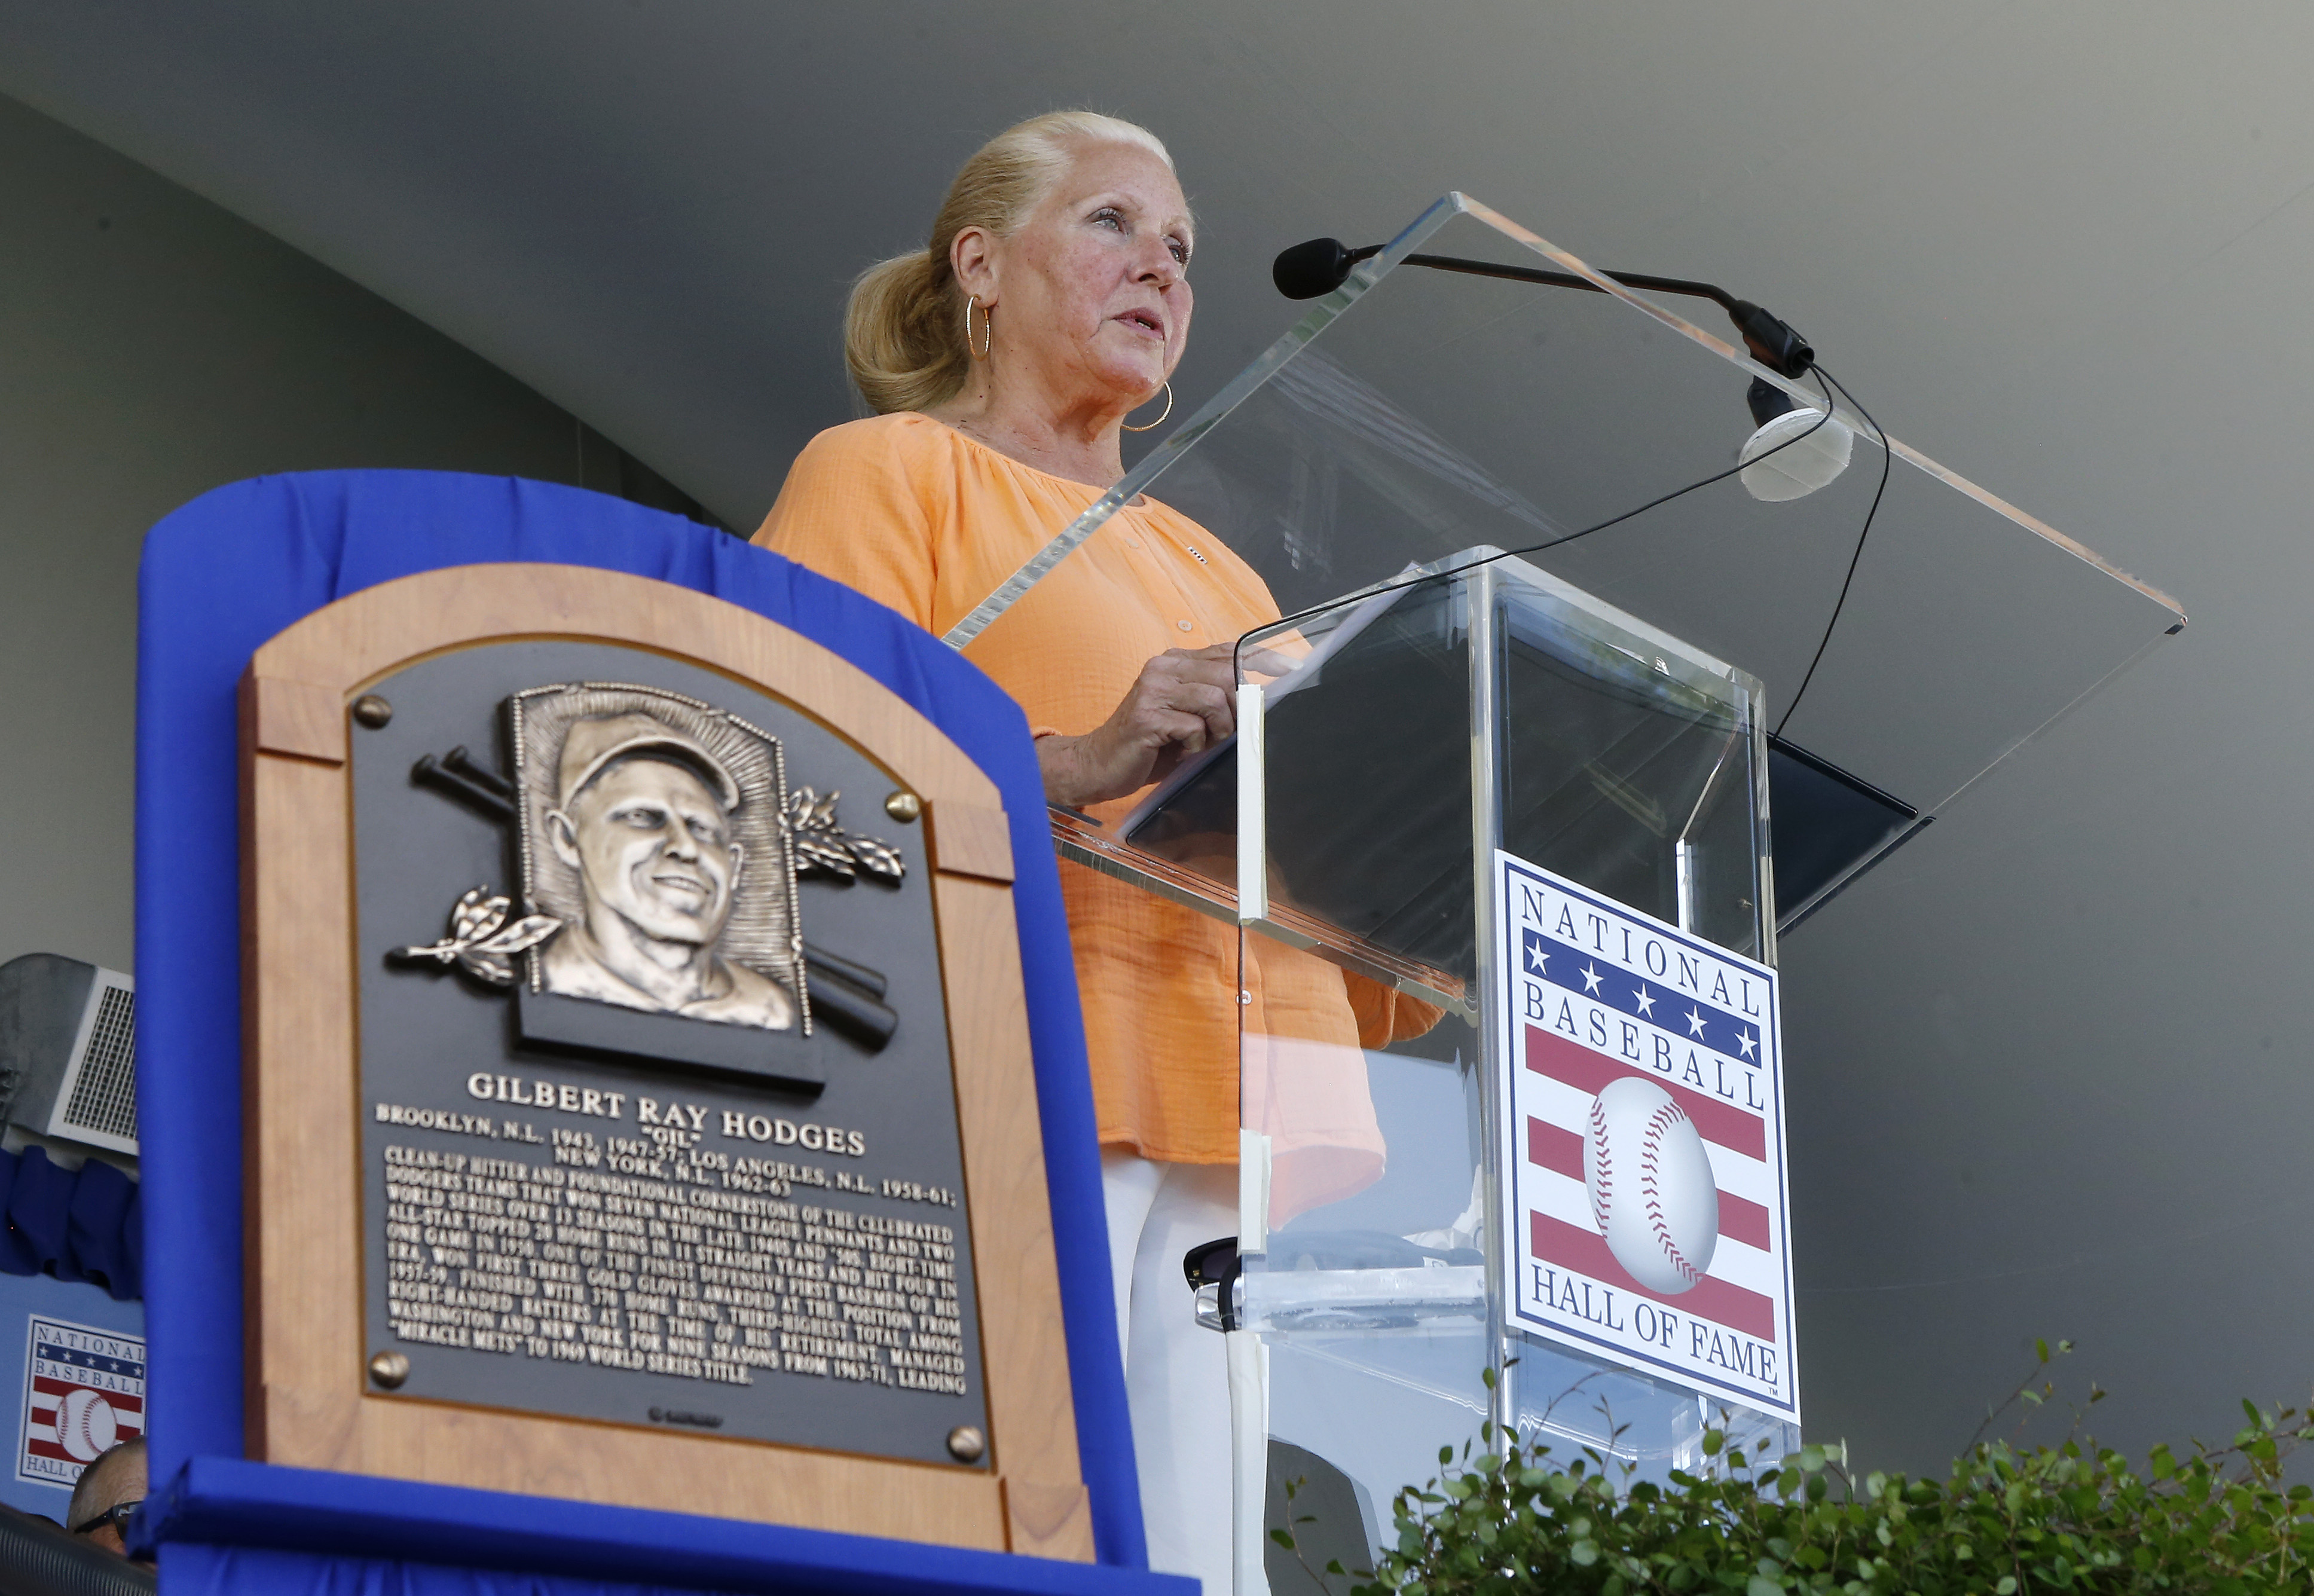 2022 National Baseball Hall of Fame Induction Ceremony